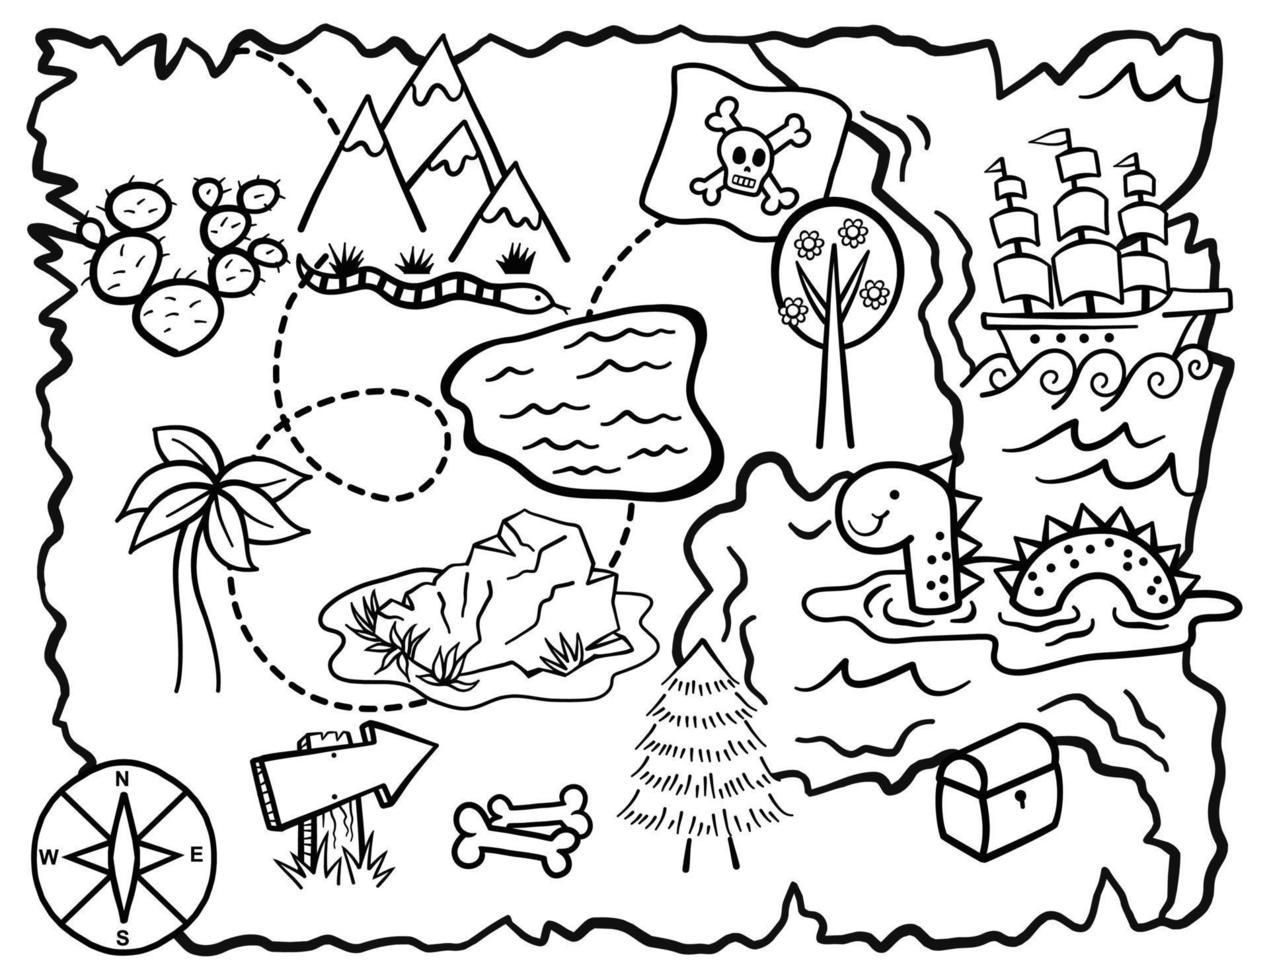 Kids Doodle Treasure Map Coloring Page vector